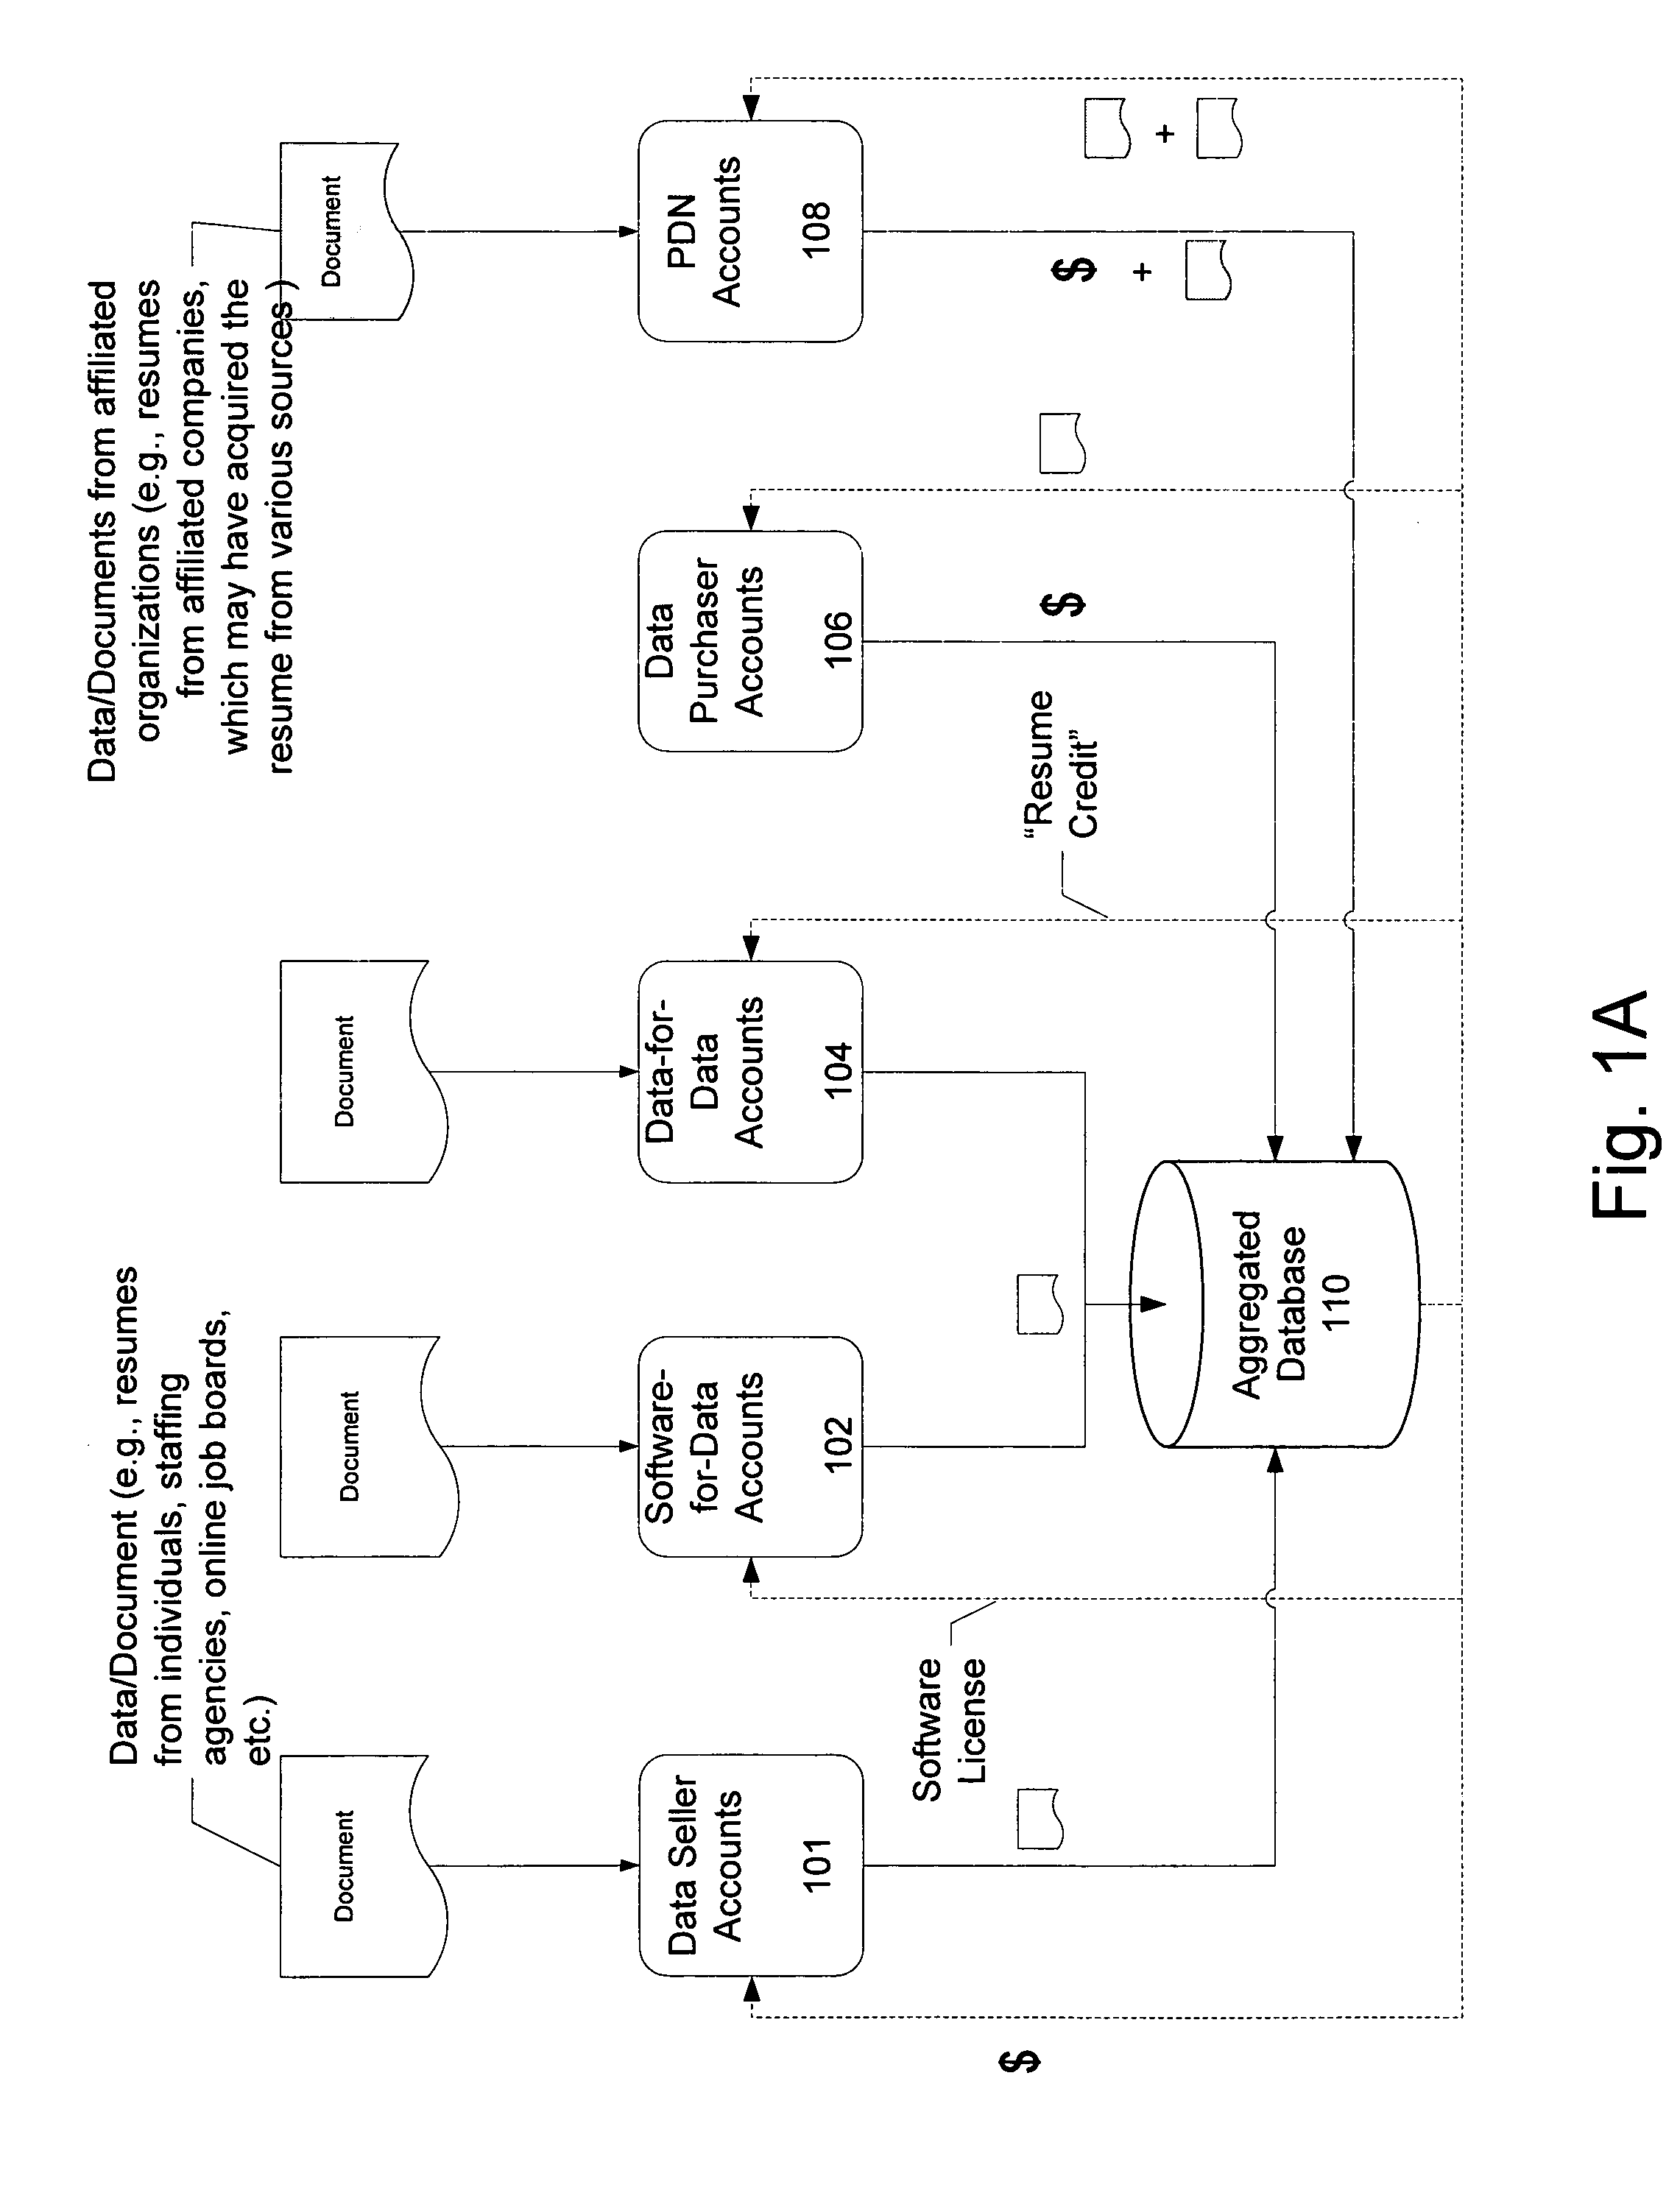 Method of and system for obtaining data from multiple sources and ranking documents based on meta data obtained through collaborative filtering and other matching techniques